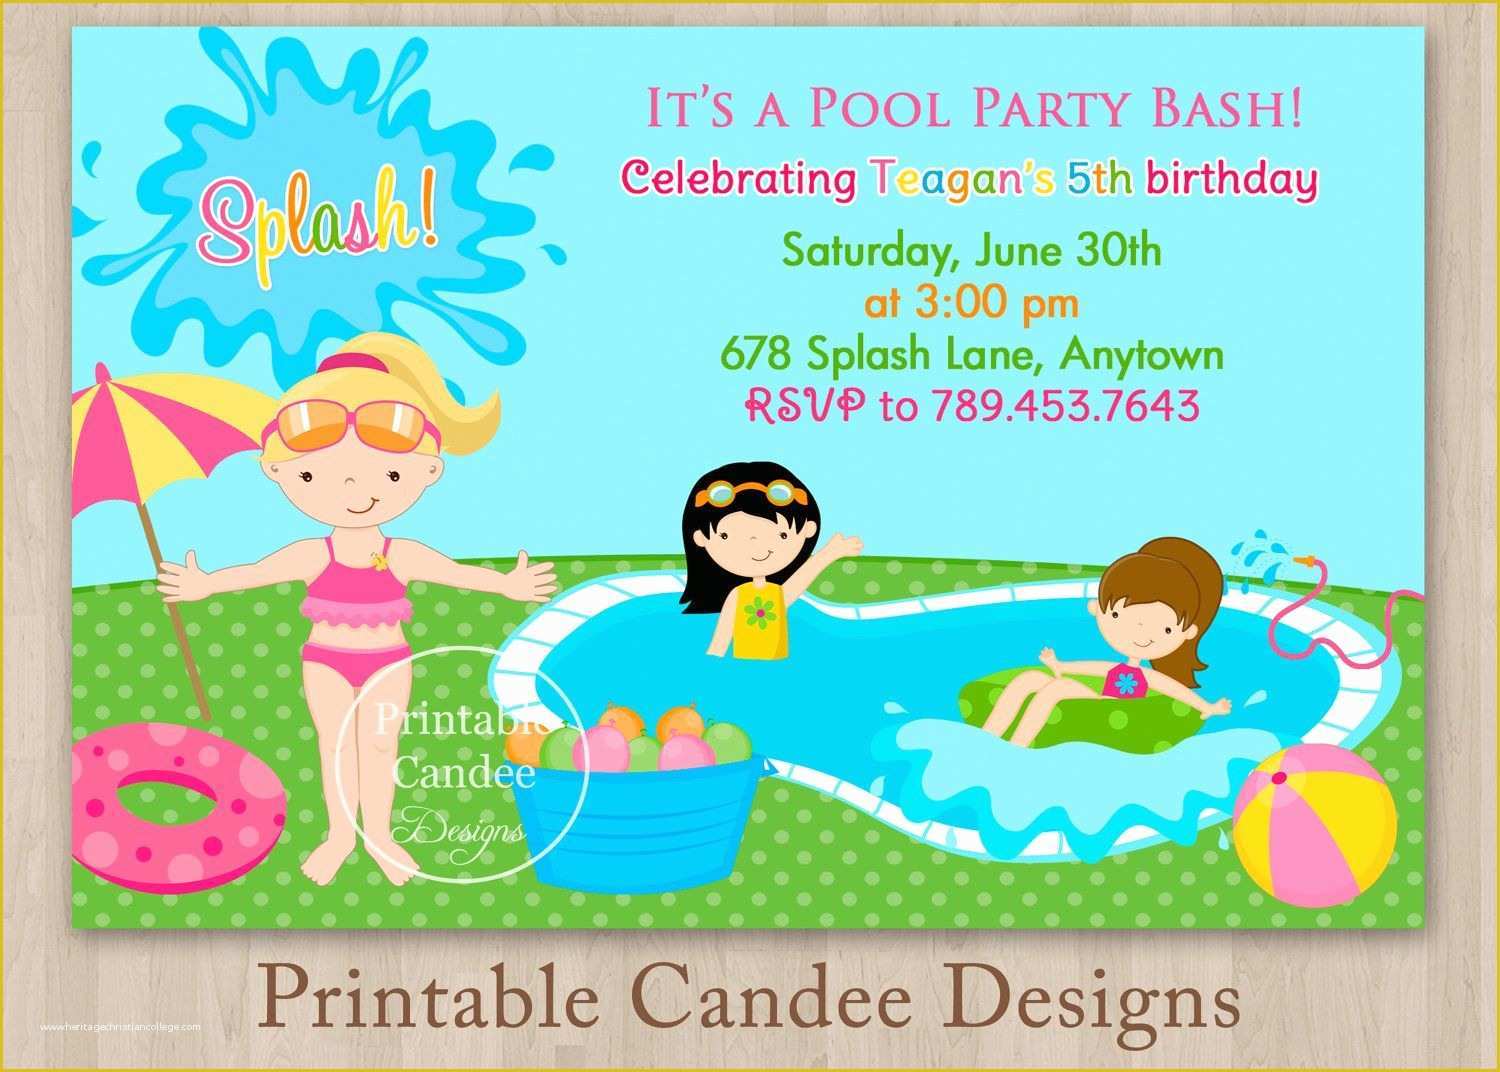 Pool Party Invitations Templates Free Of Pool Party Invitations for Kids Free Printable